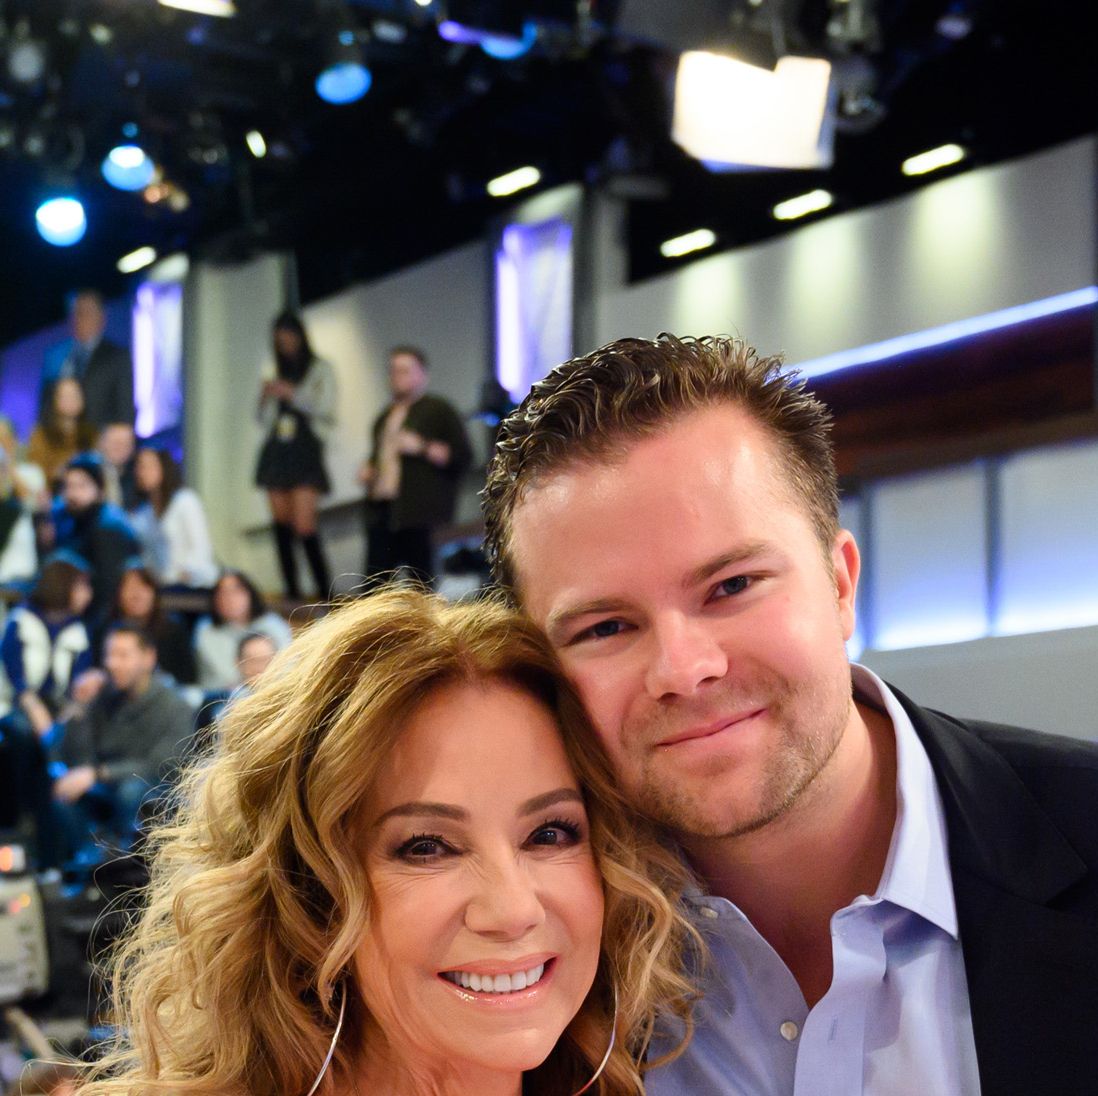 Kathie Lee Gifford Reacts to 29-Year-Old Son Cody's Engagement